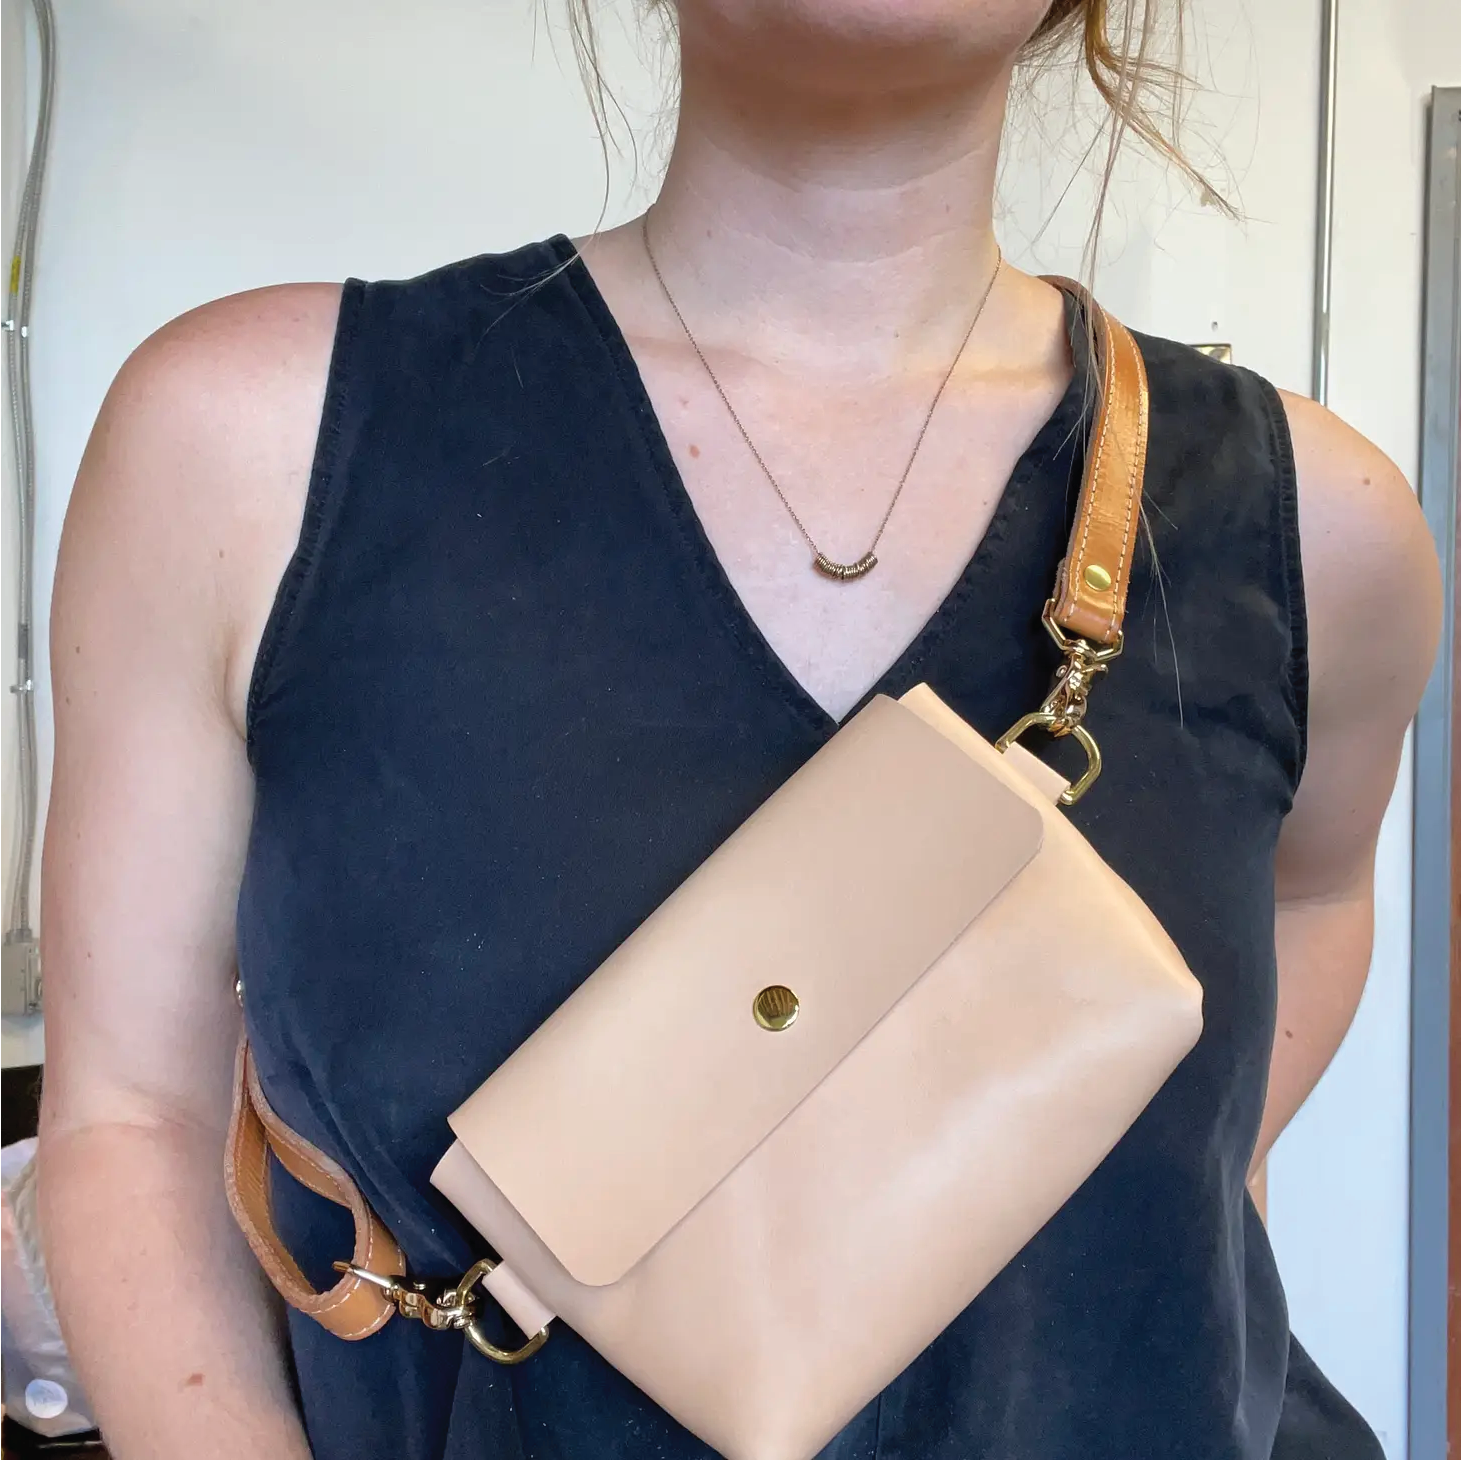 Natural leather color cross body bag slung over woman's body.